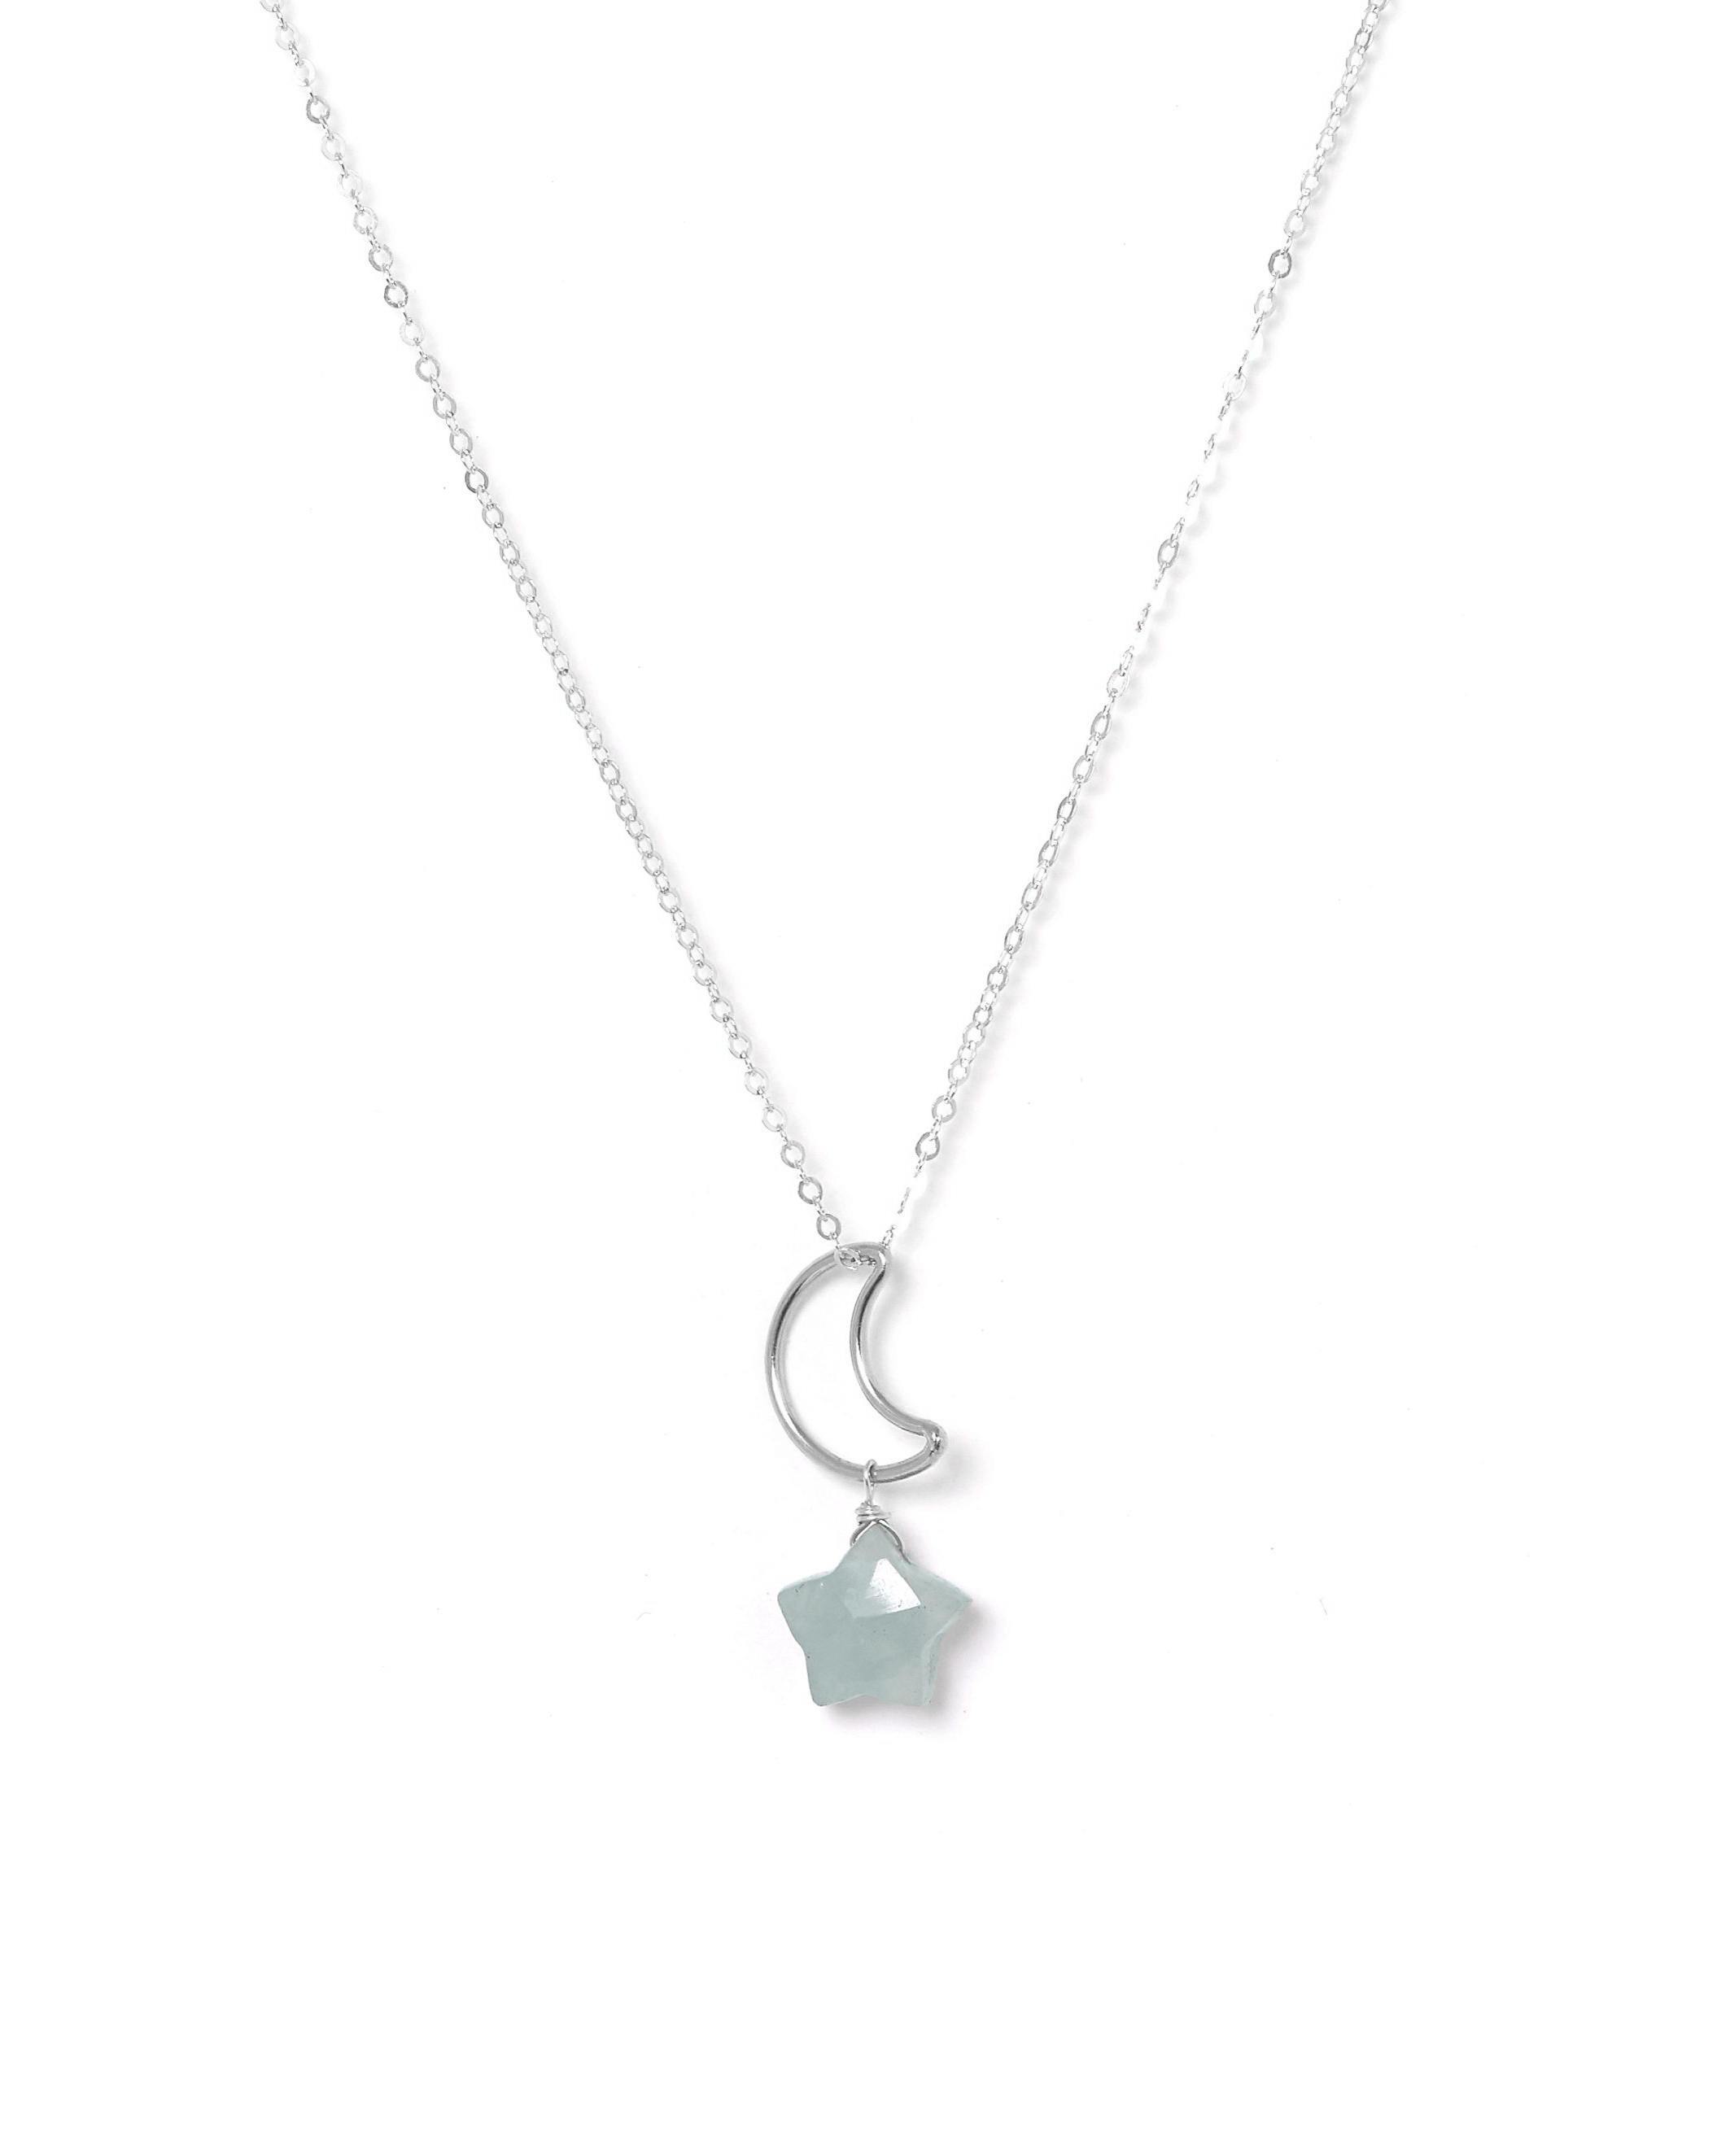 Lunastar Necklace by KOZAKH. A 16 to 18 inch adjustable length necklace, crafted in Sterling Silver, featuring a 13mm moon charm and an Amazonite star charm.